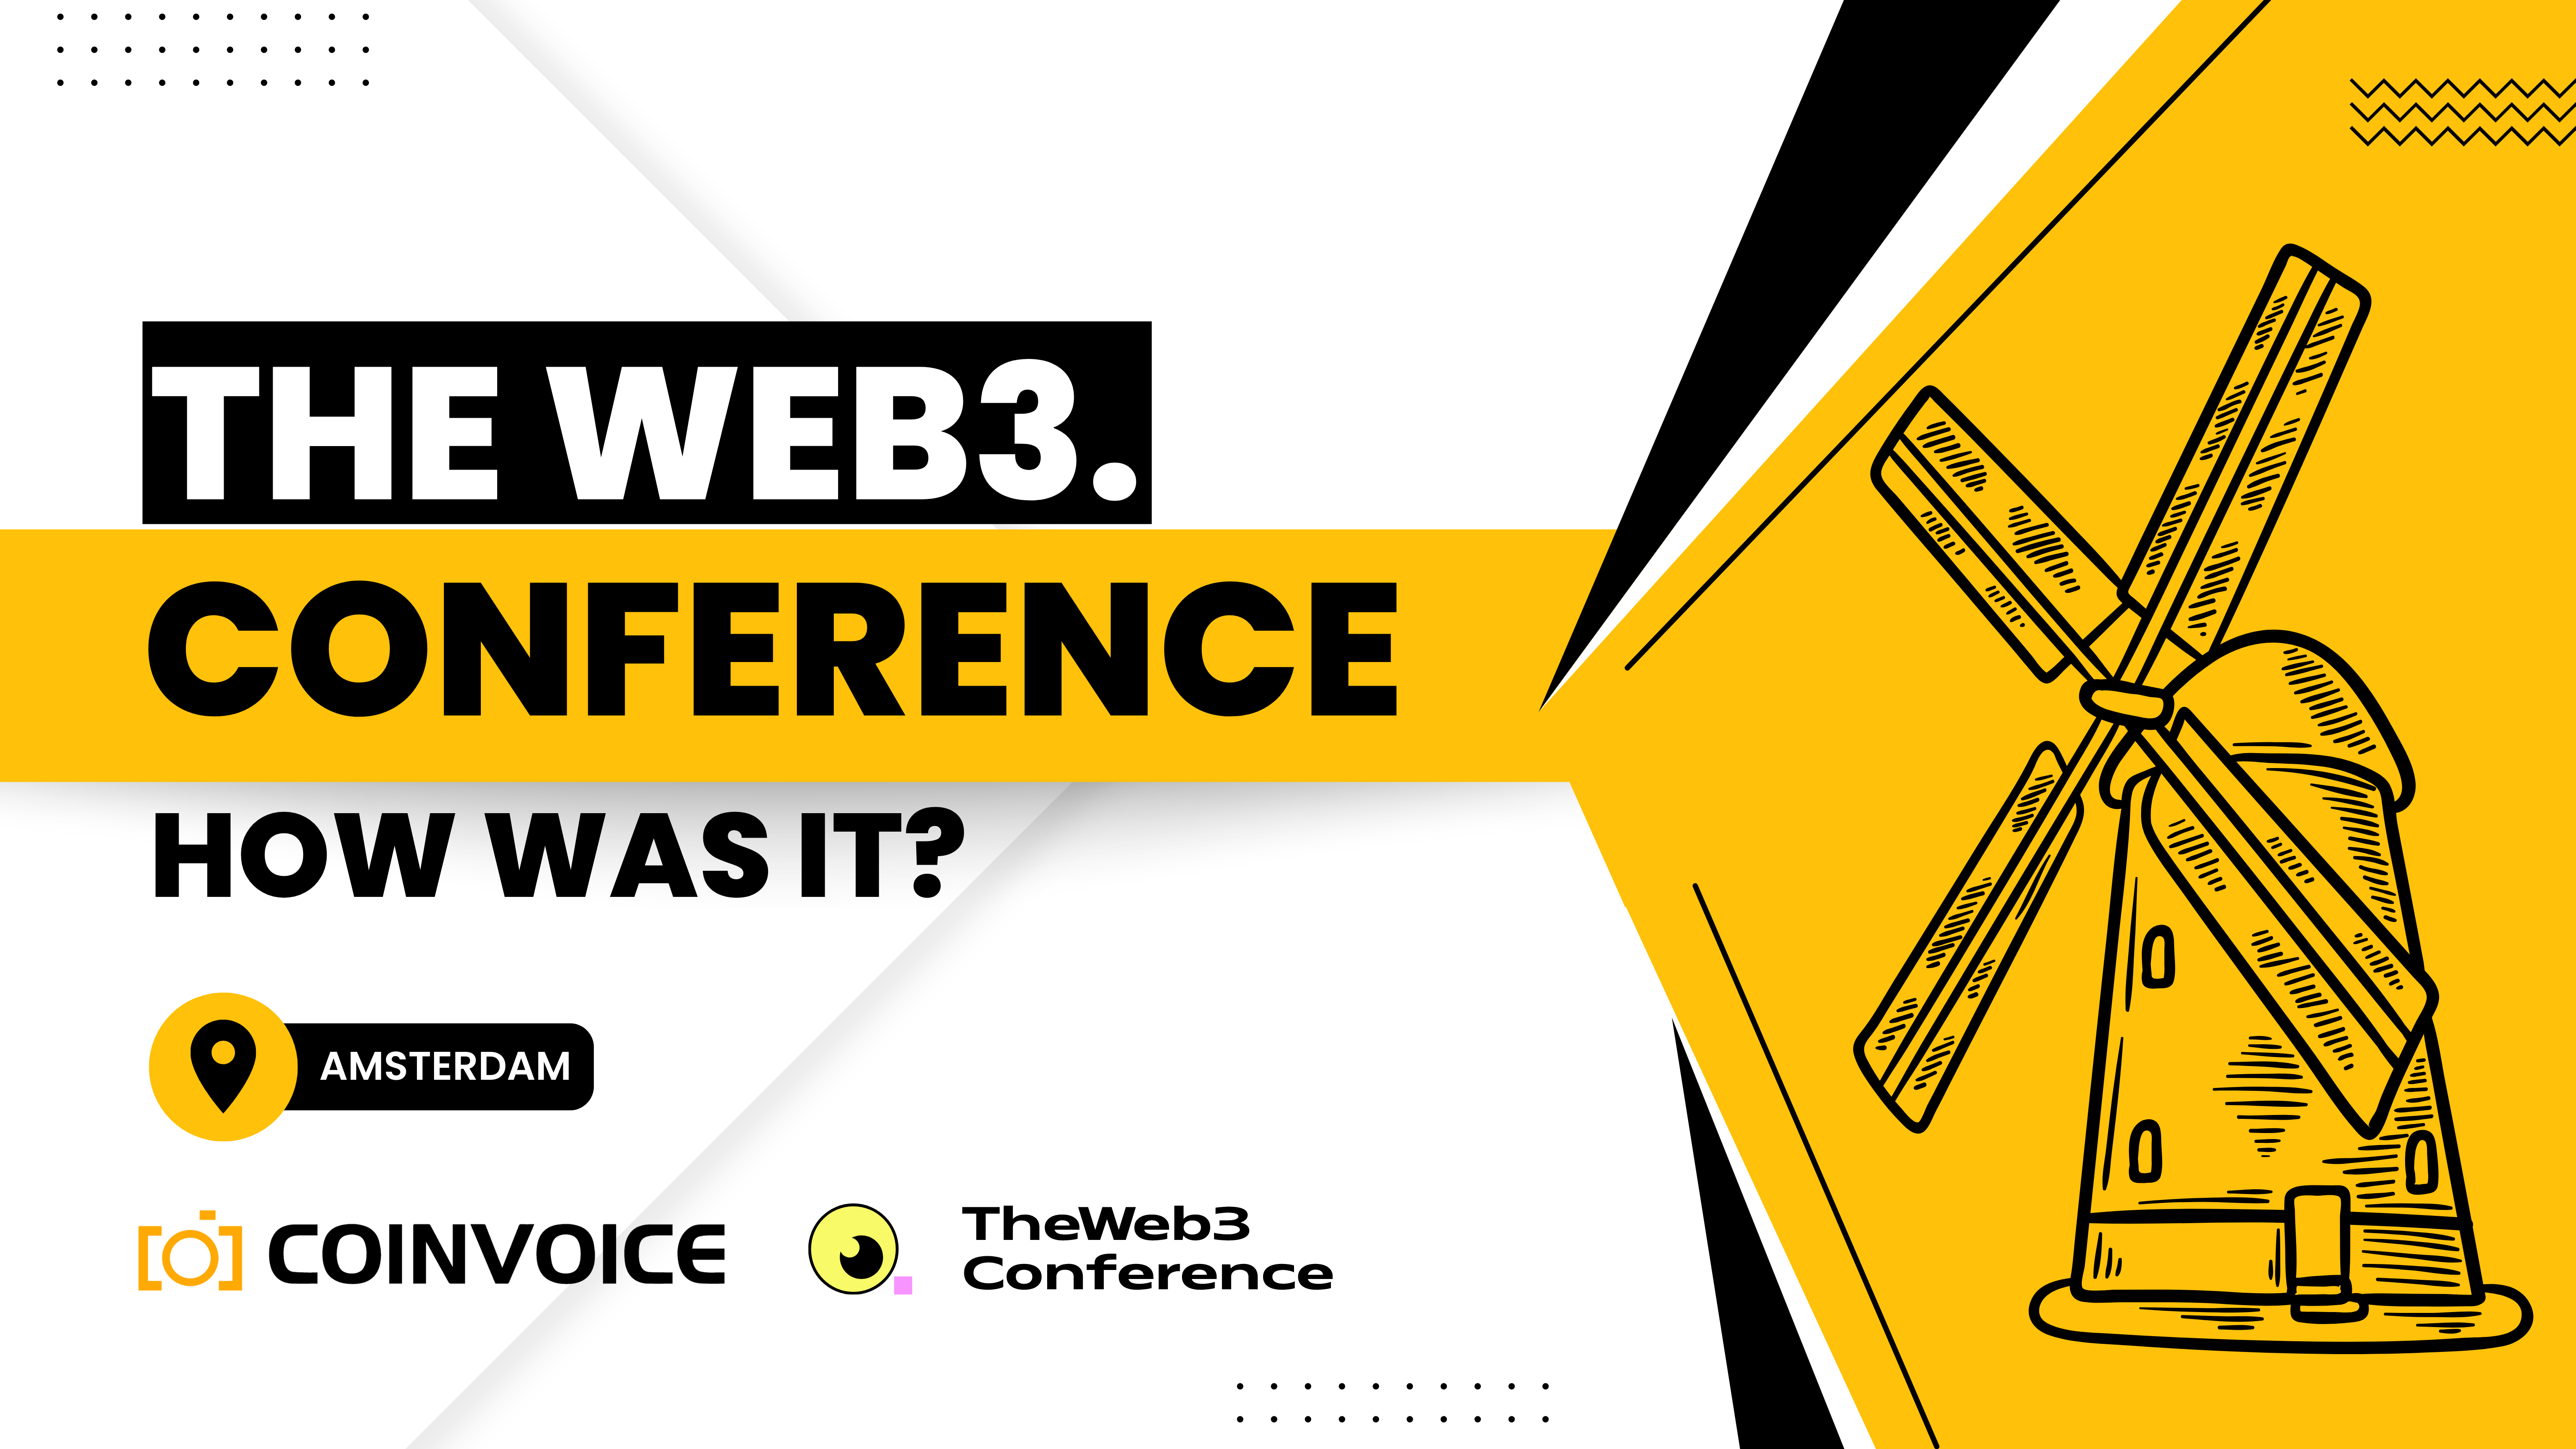 The Web3.Conference: HOW WAS IT?